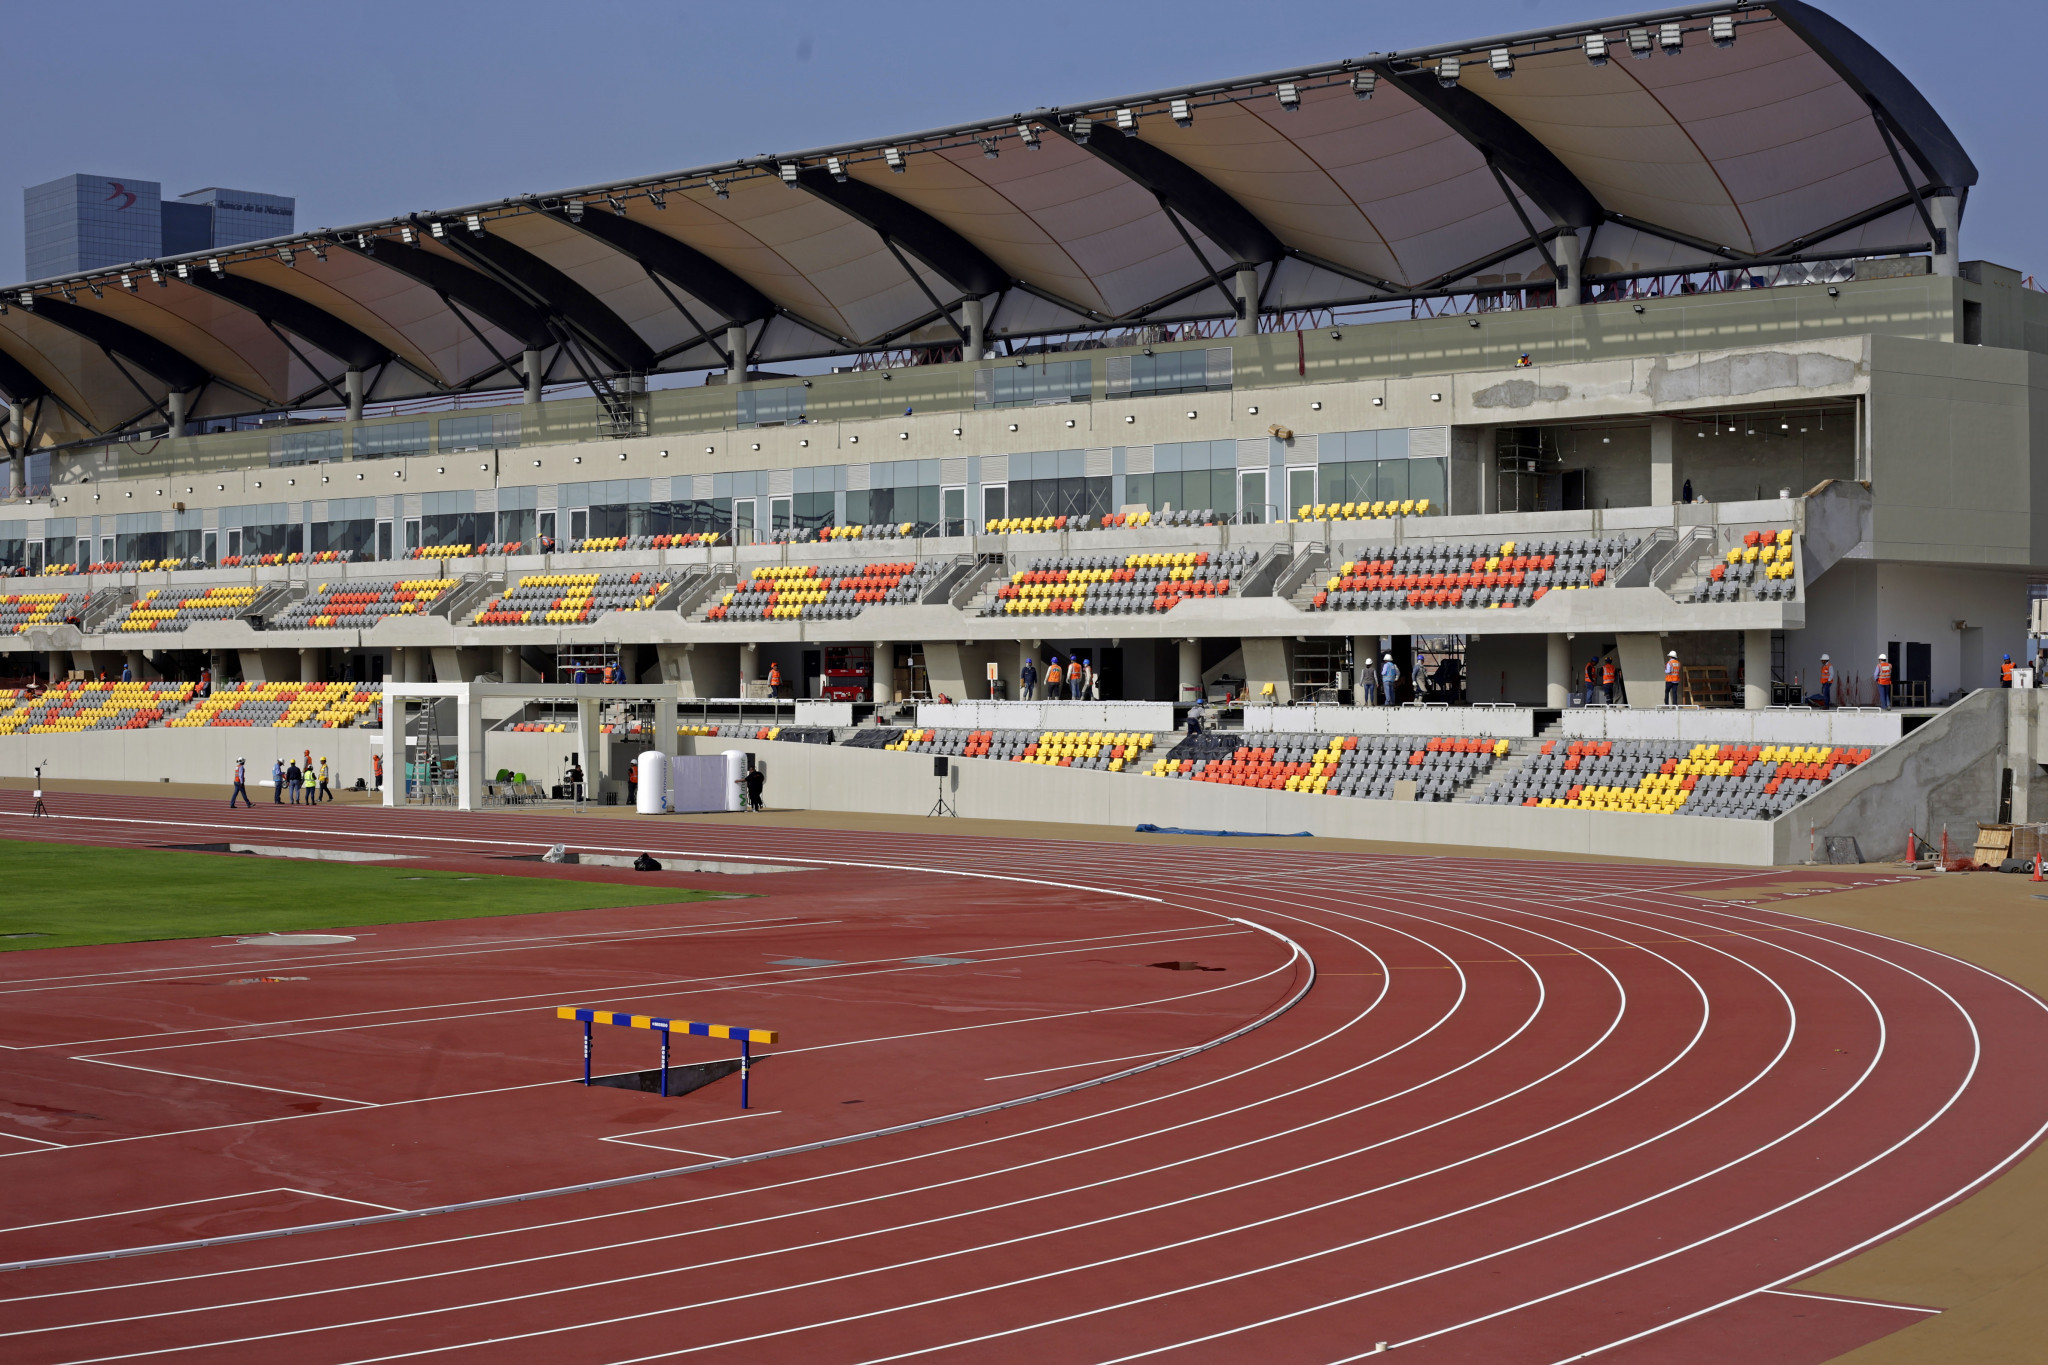 The Lima 2019 athletics track has characteristics similar to that used for the 2012 Olympic Games in London ©Lima 2019